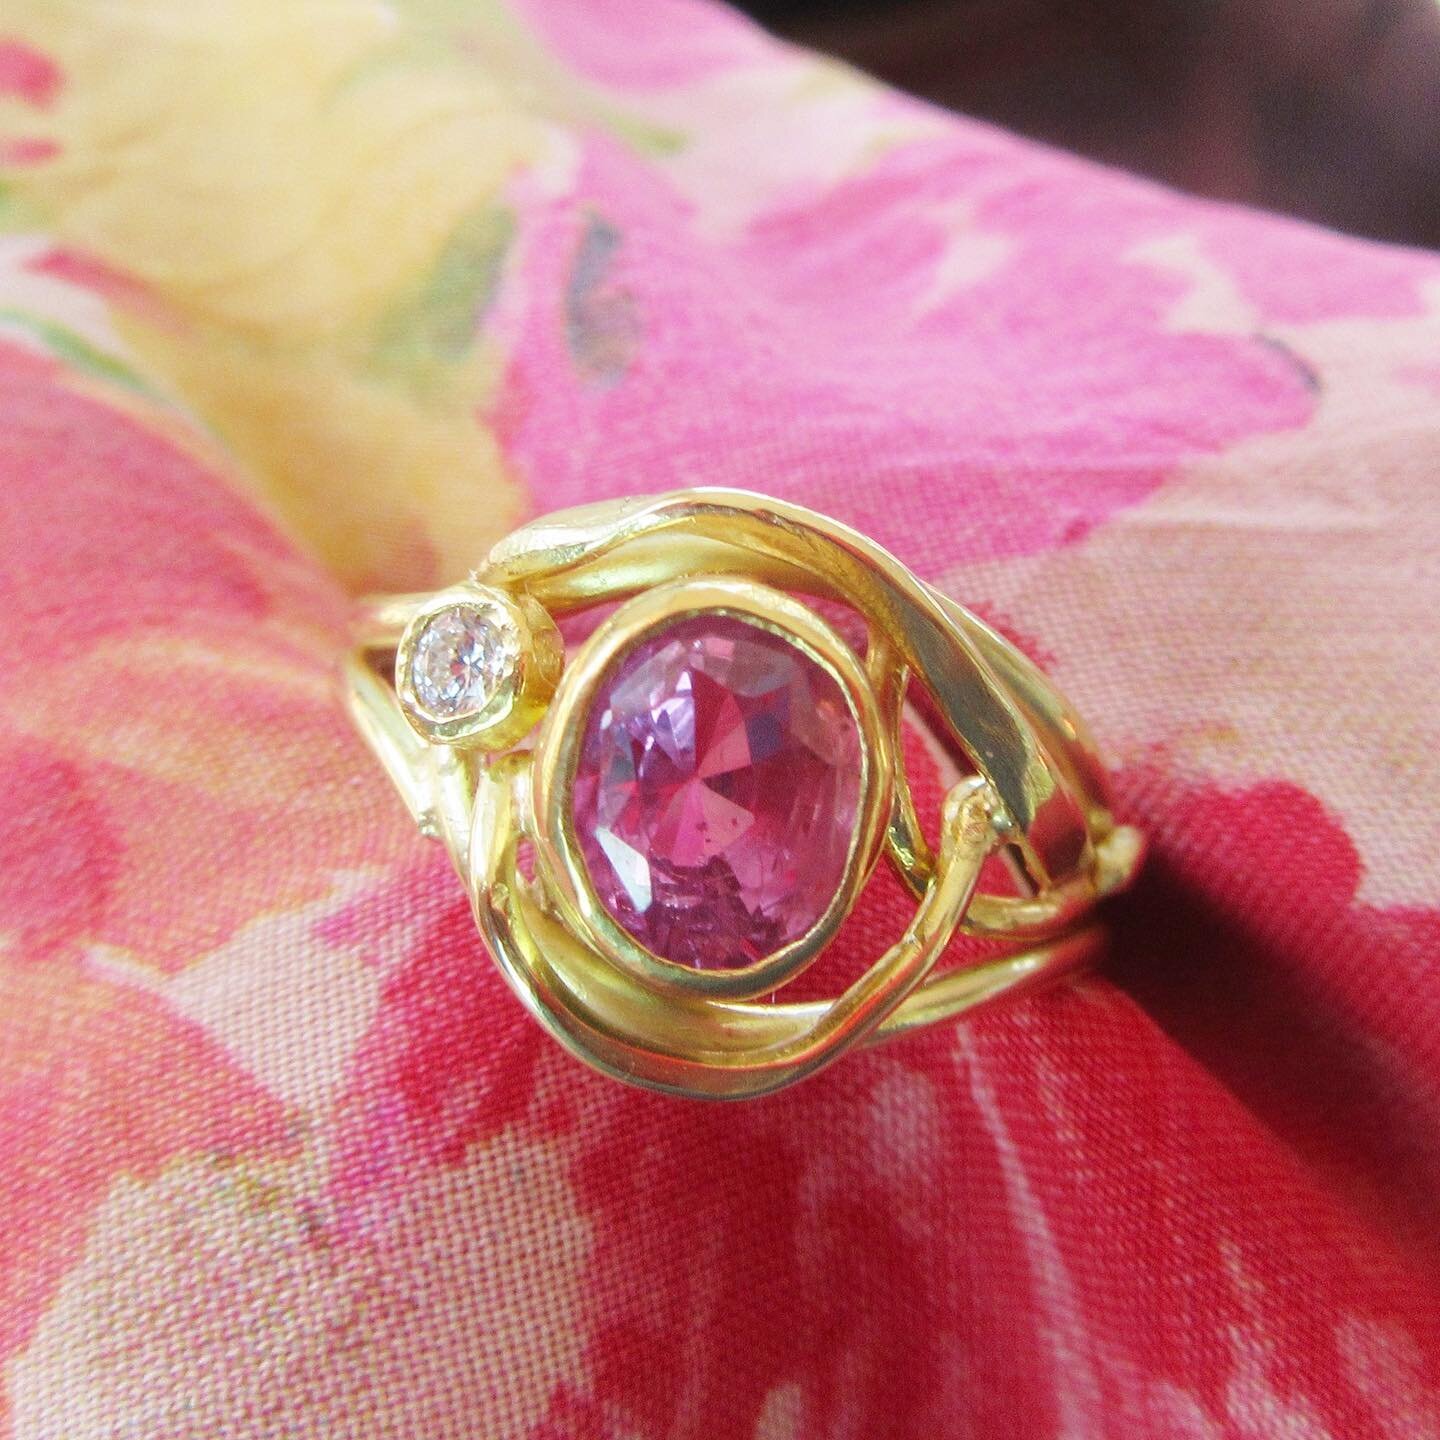 Need an incredibly special gift for Valentine&rsquo;s Day? This one of a kind ring is made with a 2.19 carat natural pink sapphire, a .07 ct diamond, 22k and 18k gold. Available now from Cabochon Gems. #beauty 
.
.
.
#karenldavidson #karendavidson #s